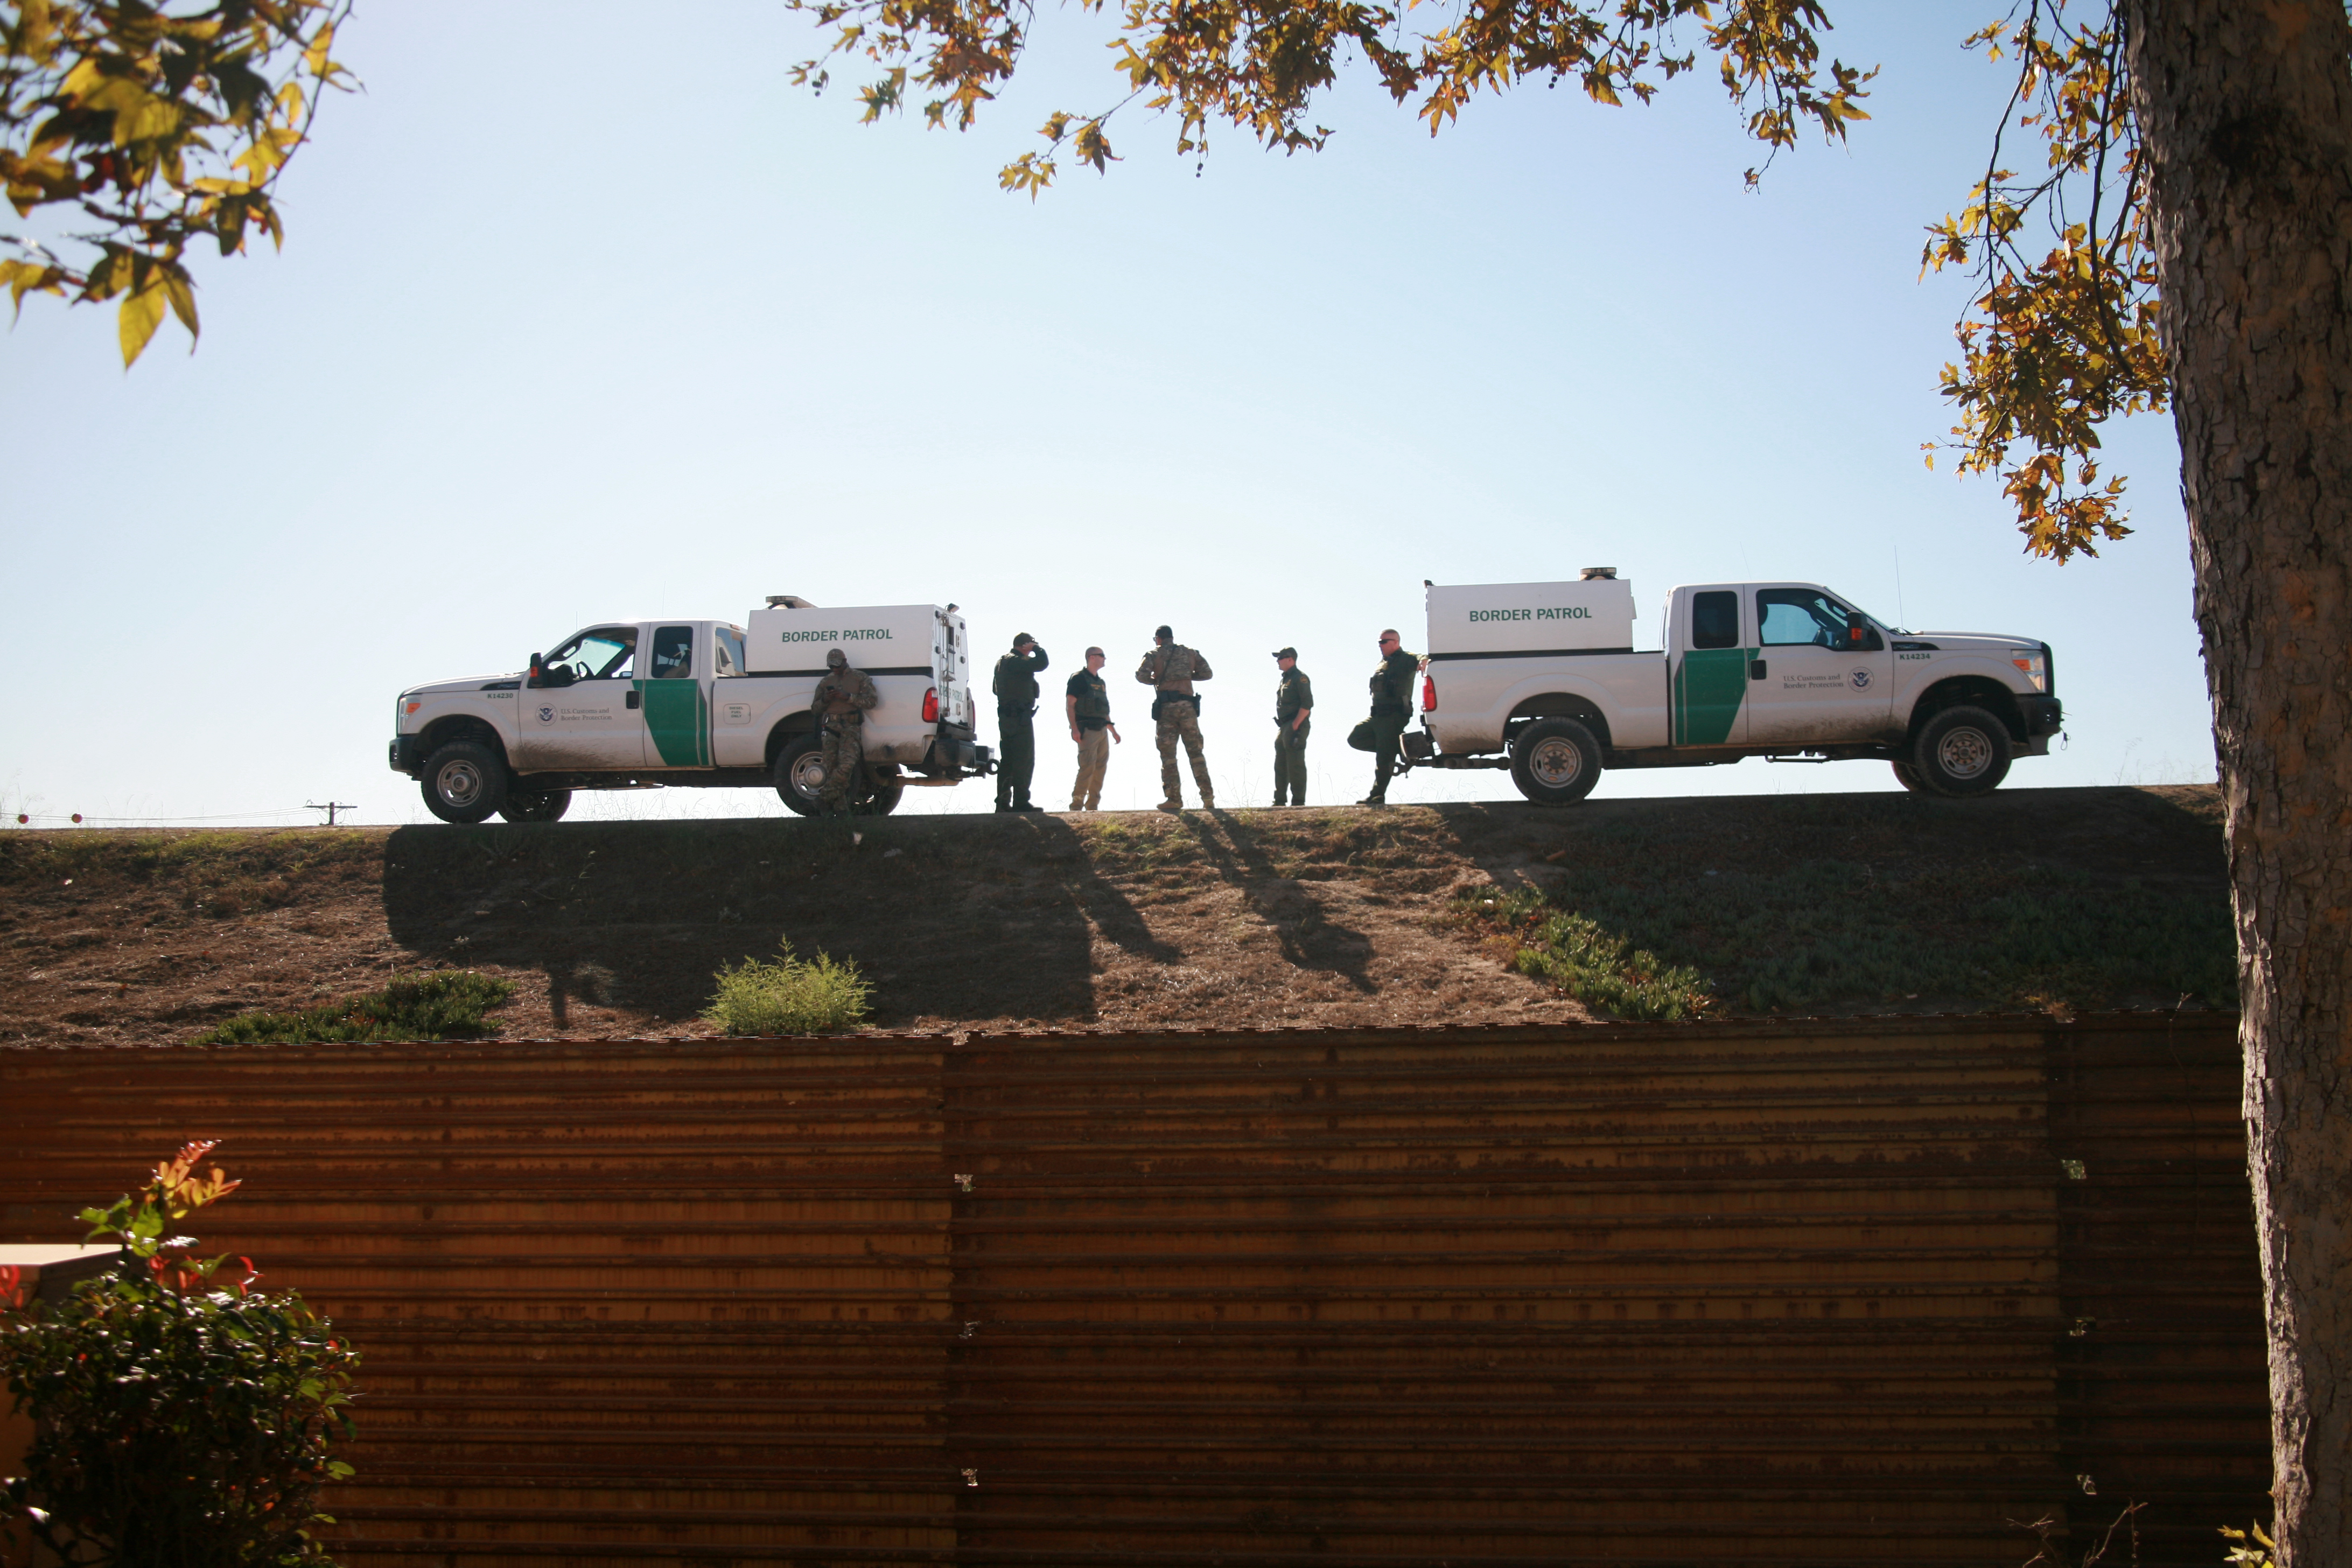 Pictured are Border Patrol agents. SHUTTERSTOCK/mikeledray